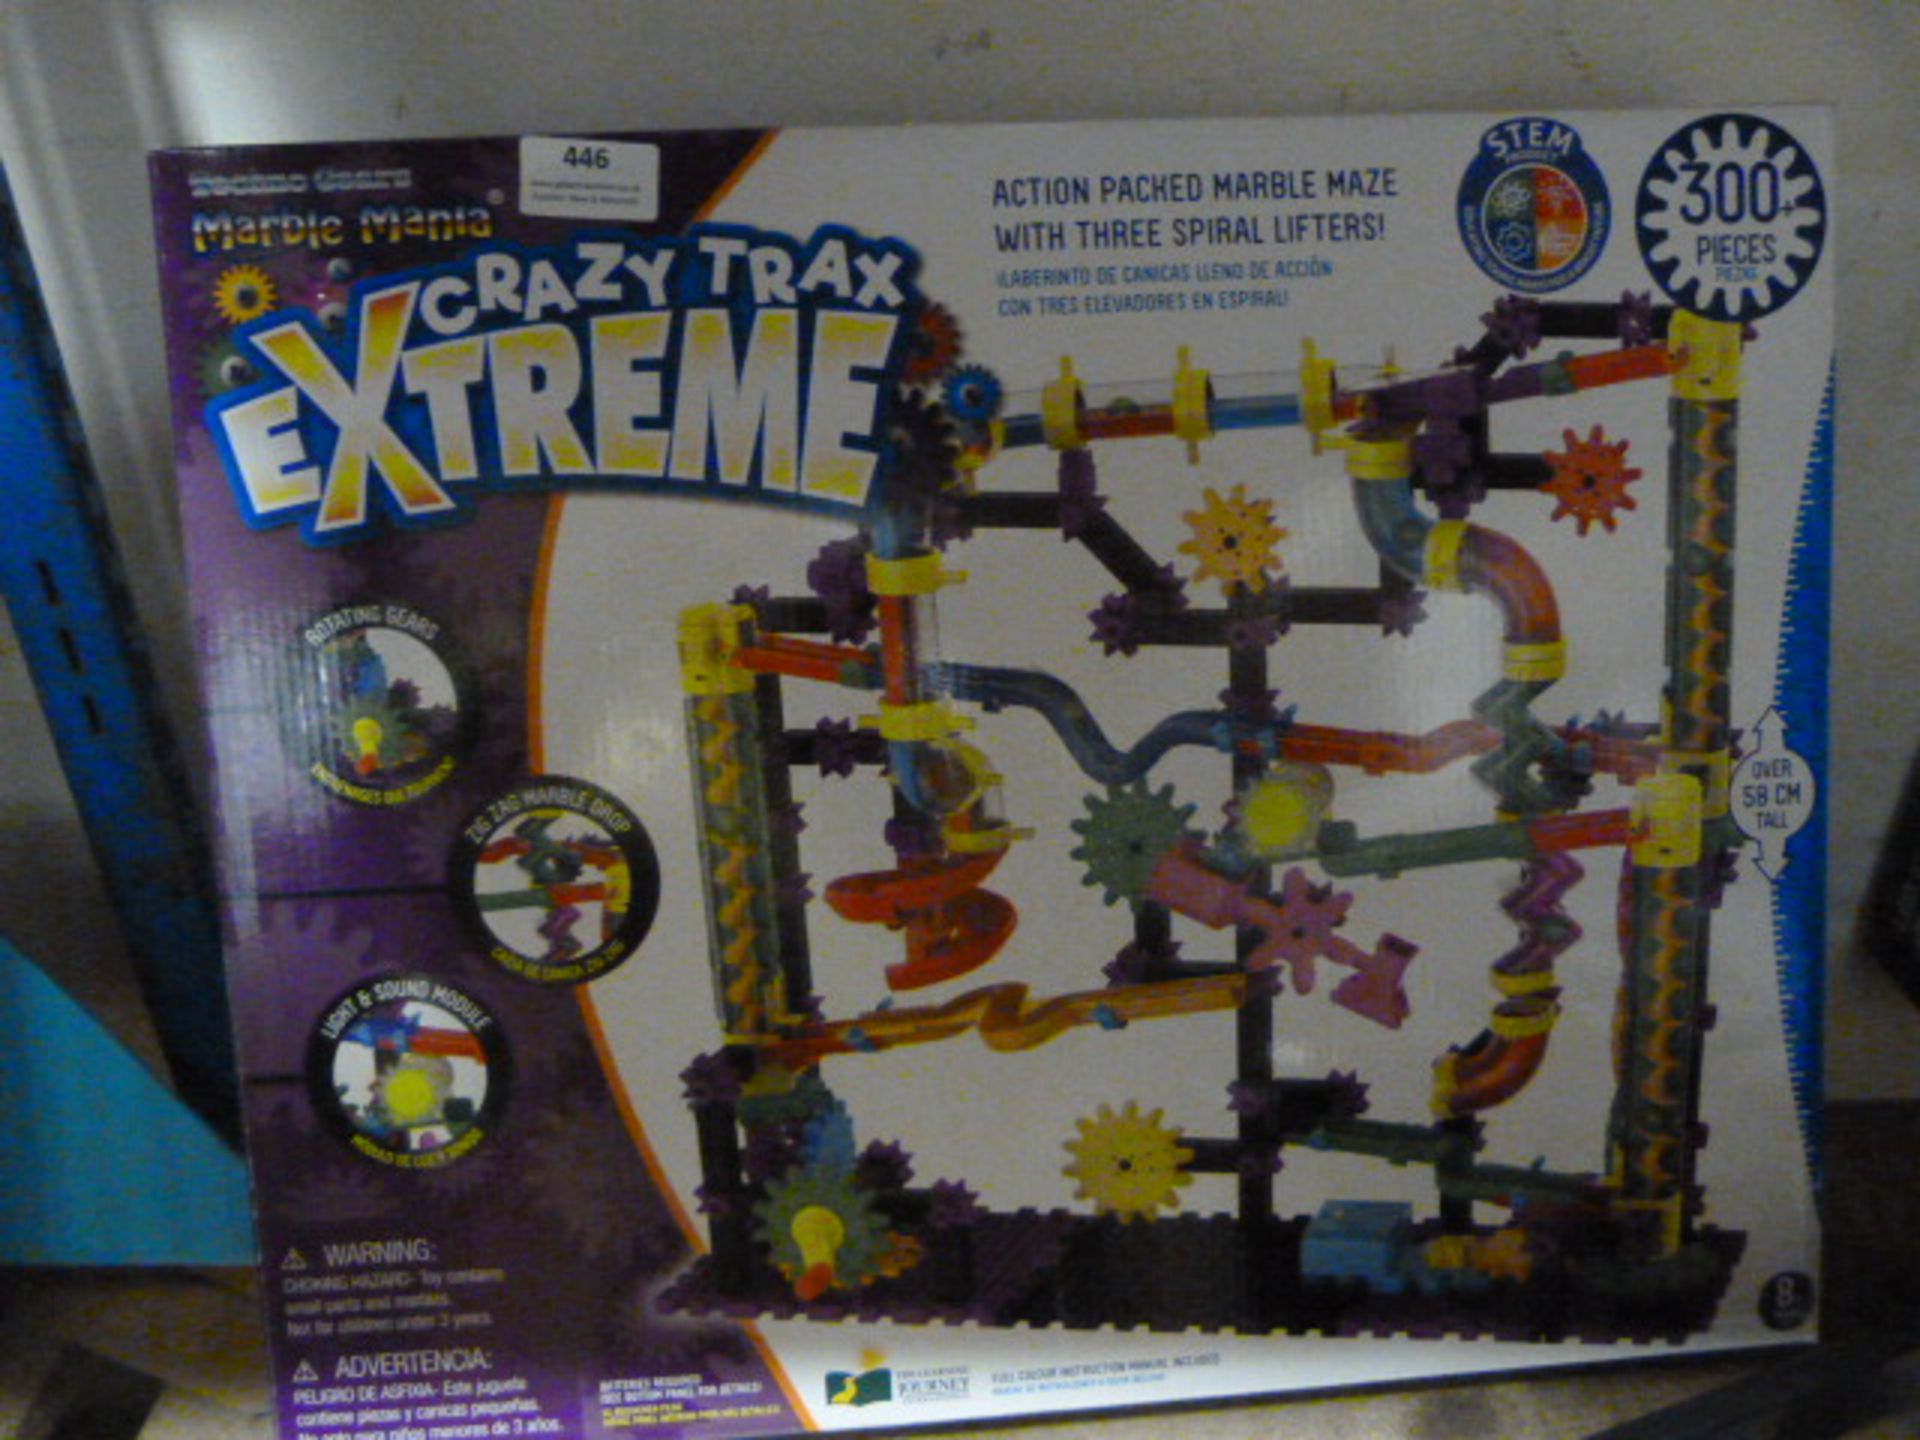 *Marble Mania Crazy Trax Extreme